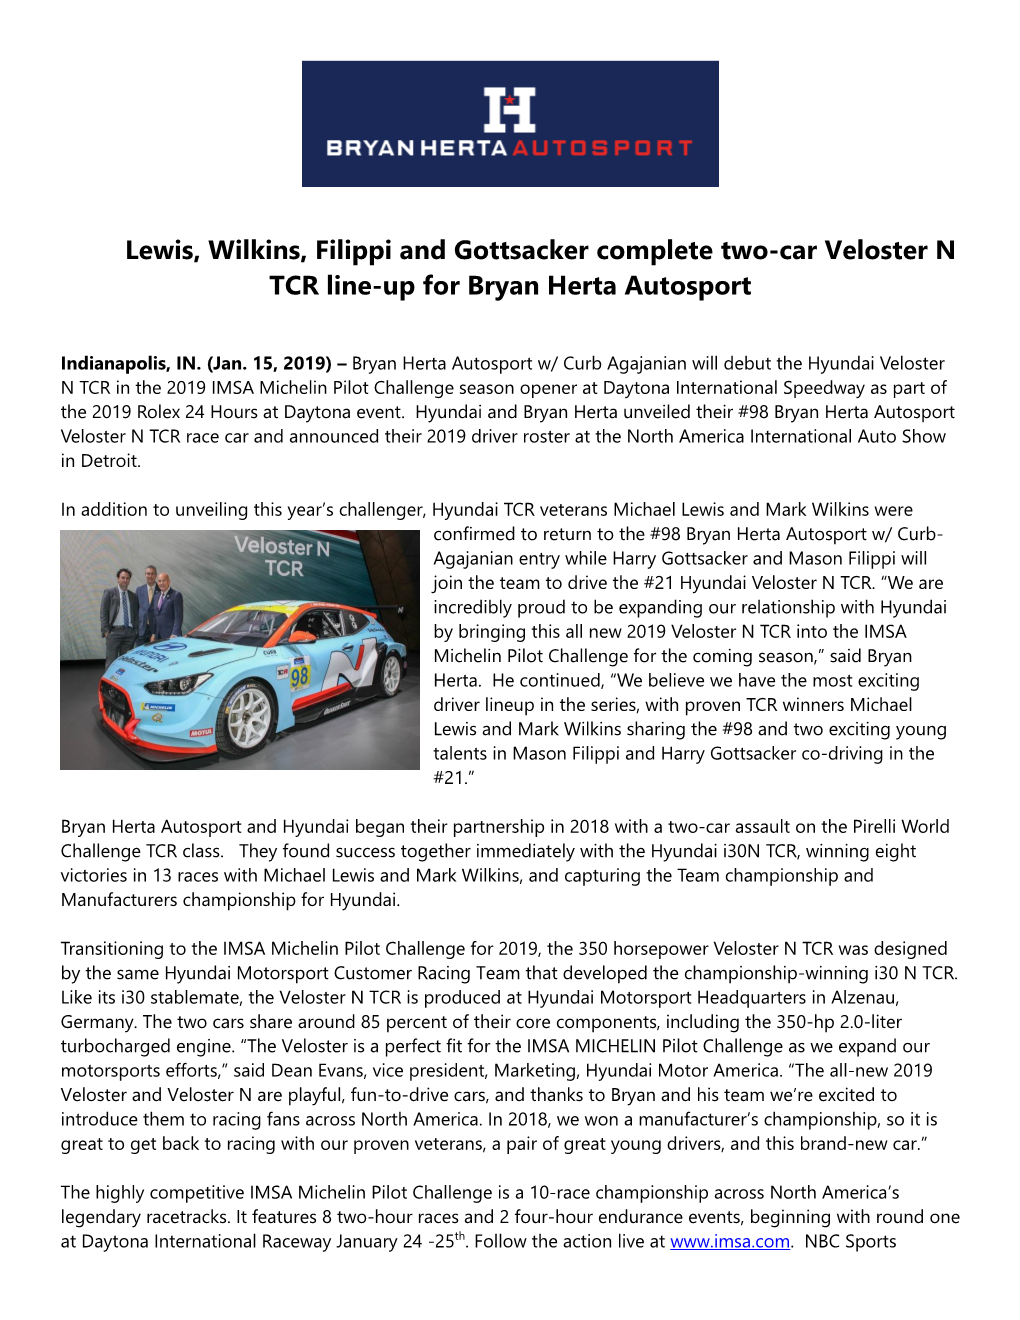 Lewis, Wilkins, Filippi and Gottsacker Complete Two-Car Veloster N TCR Line-Up for Bryan Herta Autosport